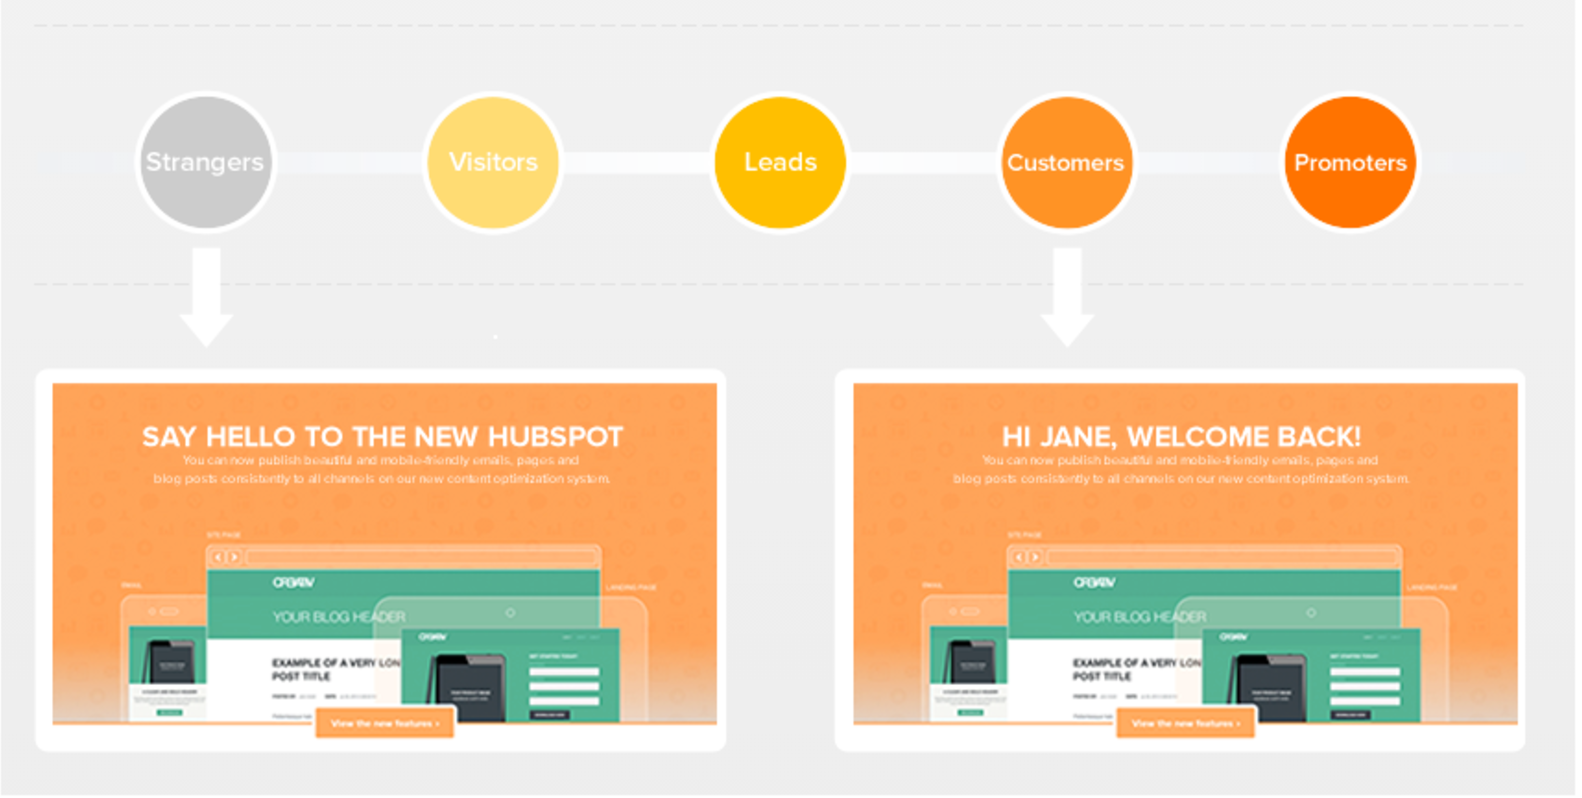 hubspot-personalize-customer-experience